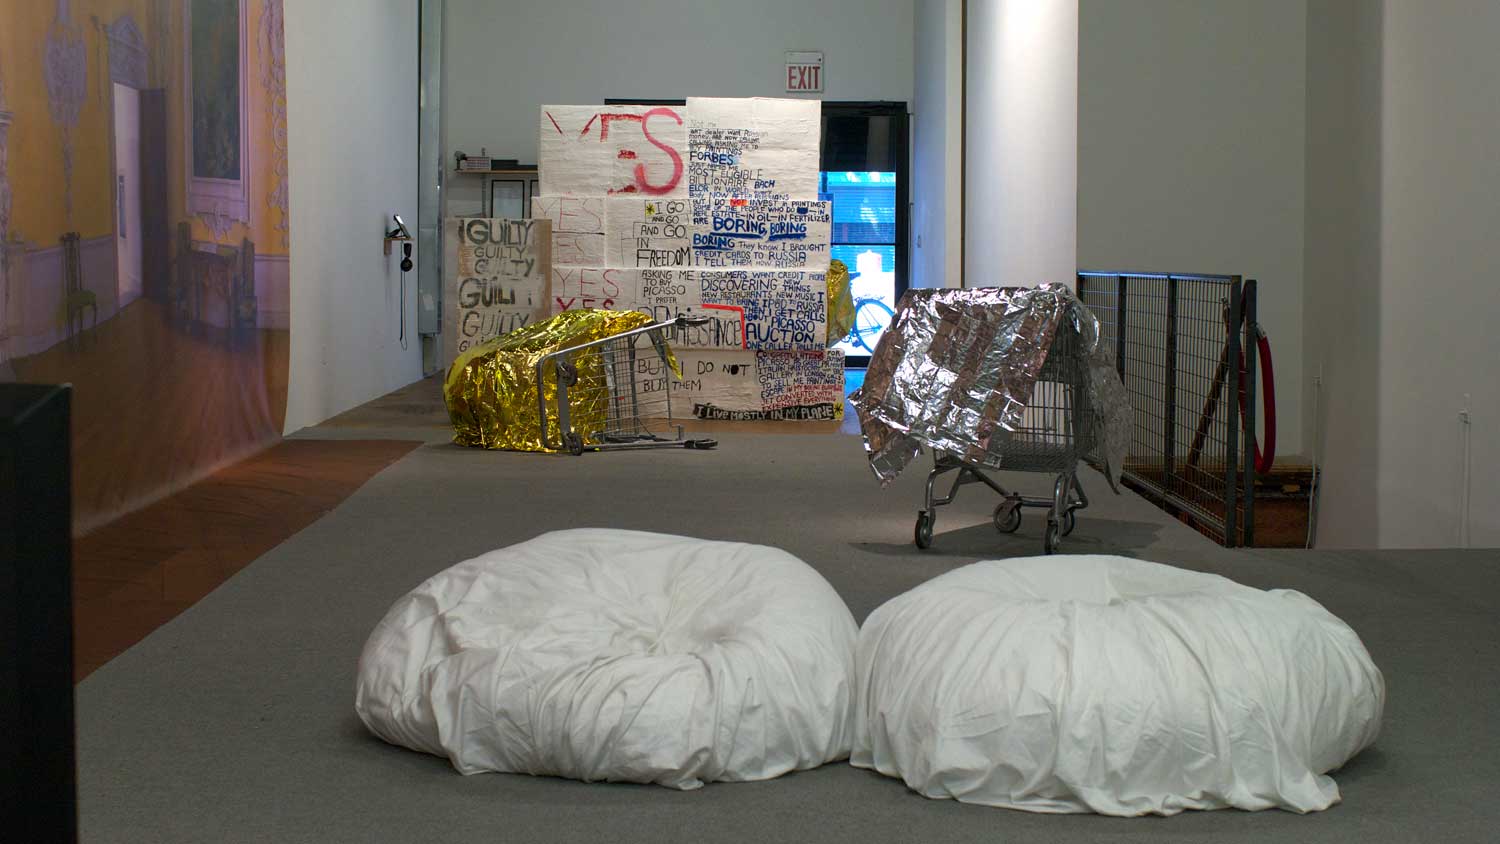 Erik Moskowitz and Amanda Trager, *Two Russians in the Free World*. Installation view